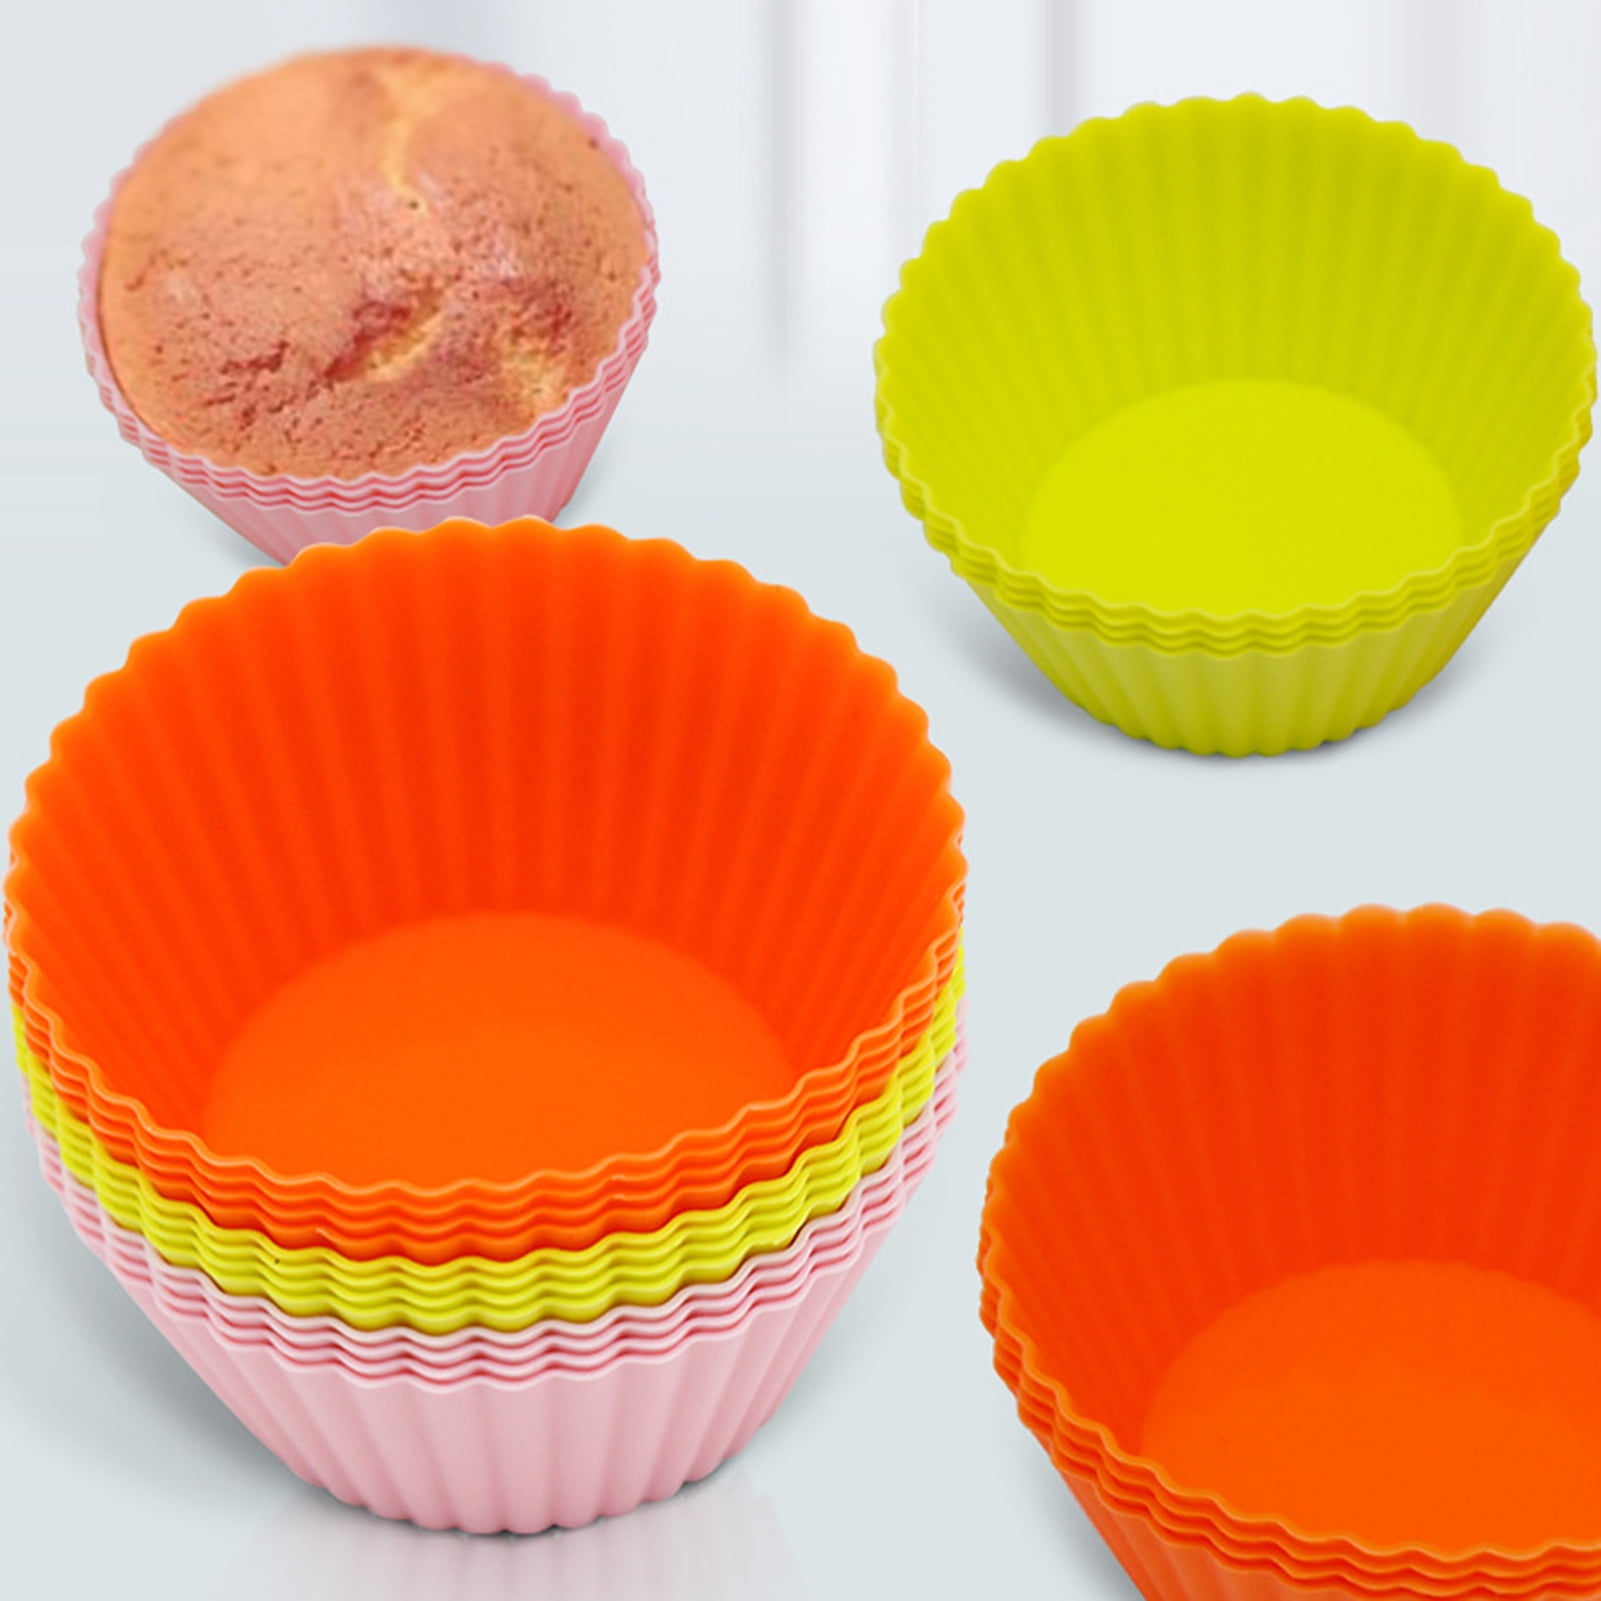 Visland 12 Pcs Silicone Baking Muffin Cups, Reusable Eco-friendly Cupcake  Liners Nonstick Muffin Cups Cake Molds Set Standard Size Cupcake Holder 